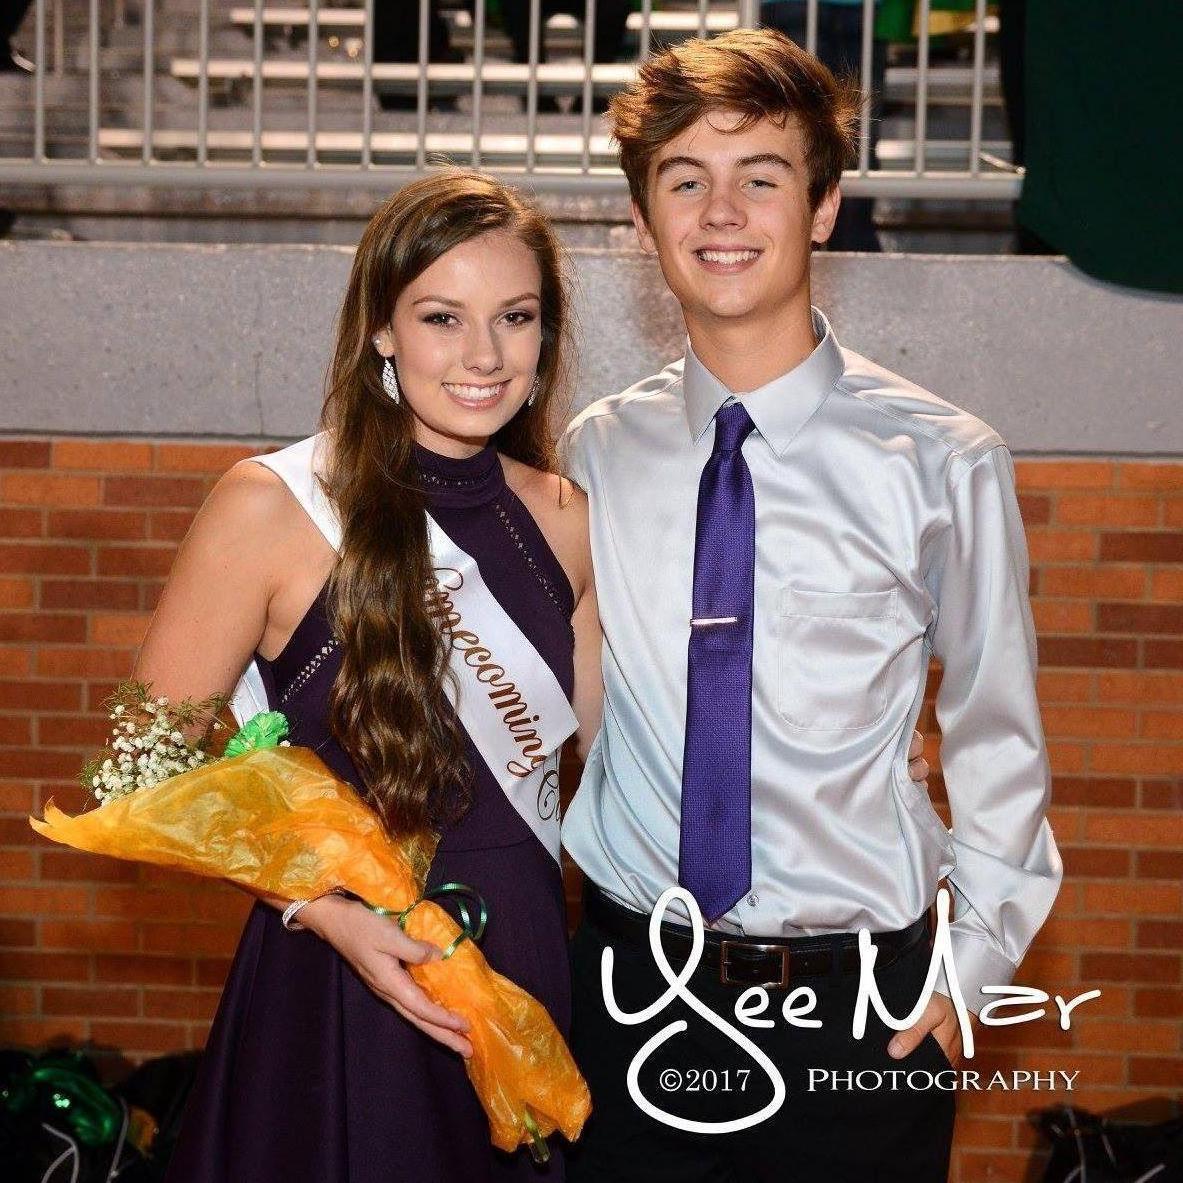 Jade was nominated for Homecoming Queen and Carson was her escort.